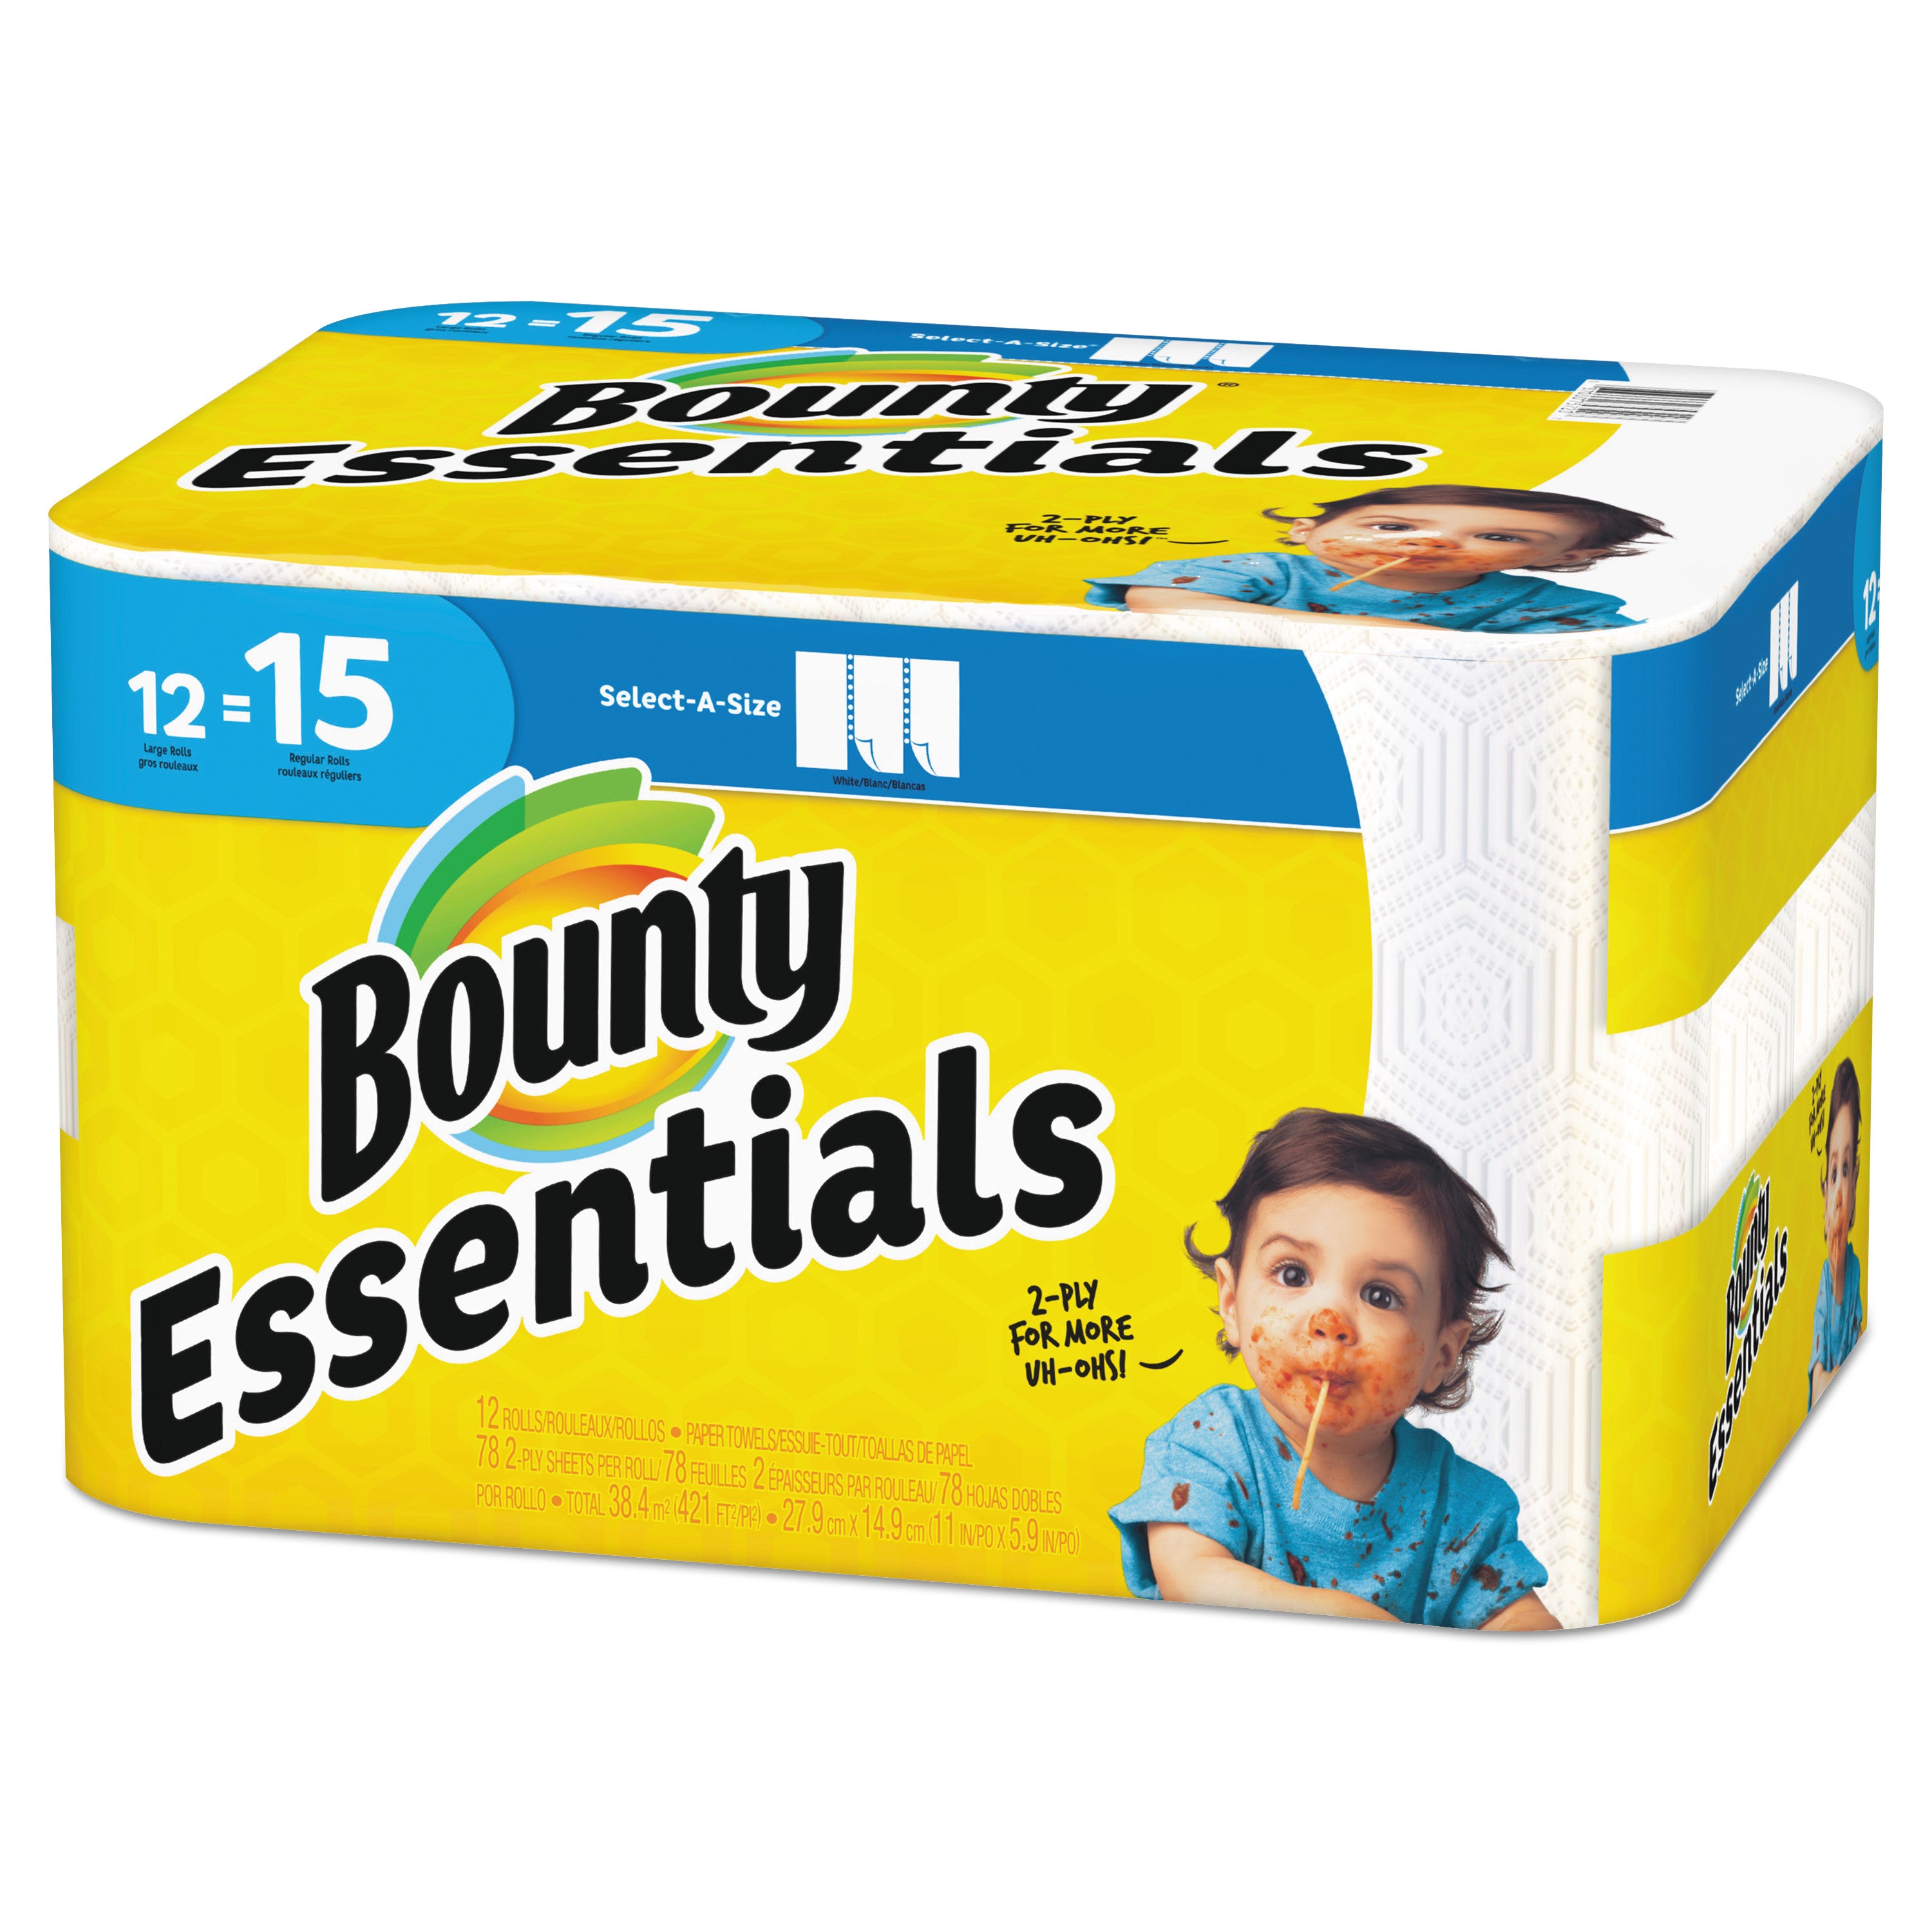 essentials-select-a-size-kitchen-roll-paper-towels-2-ply-78-sheets-roll-12-rolls-carton_pgc75720 - 1